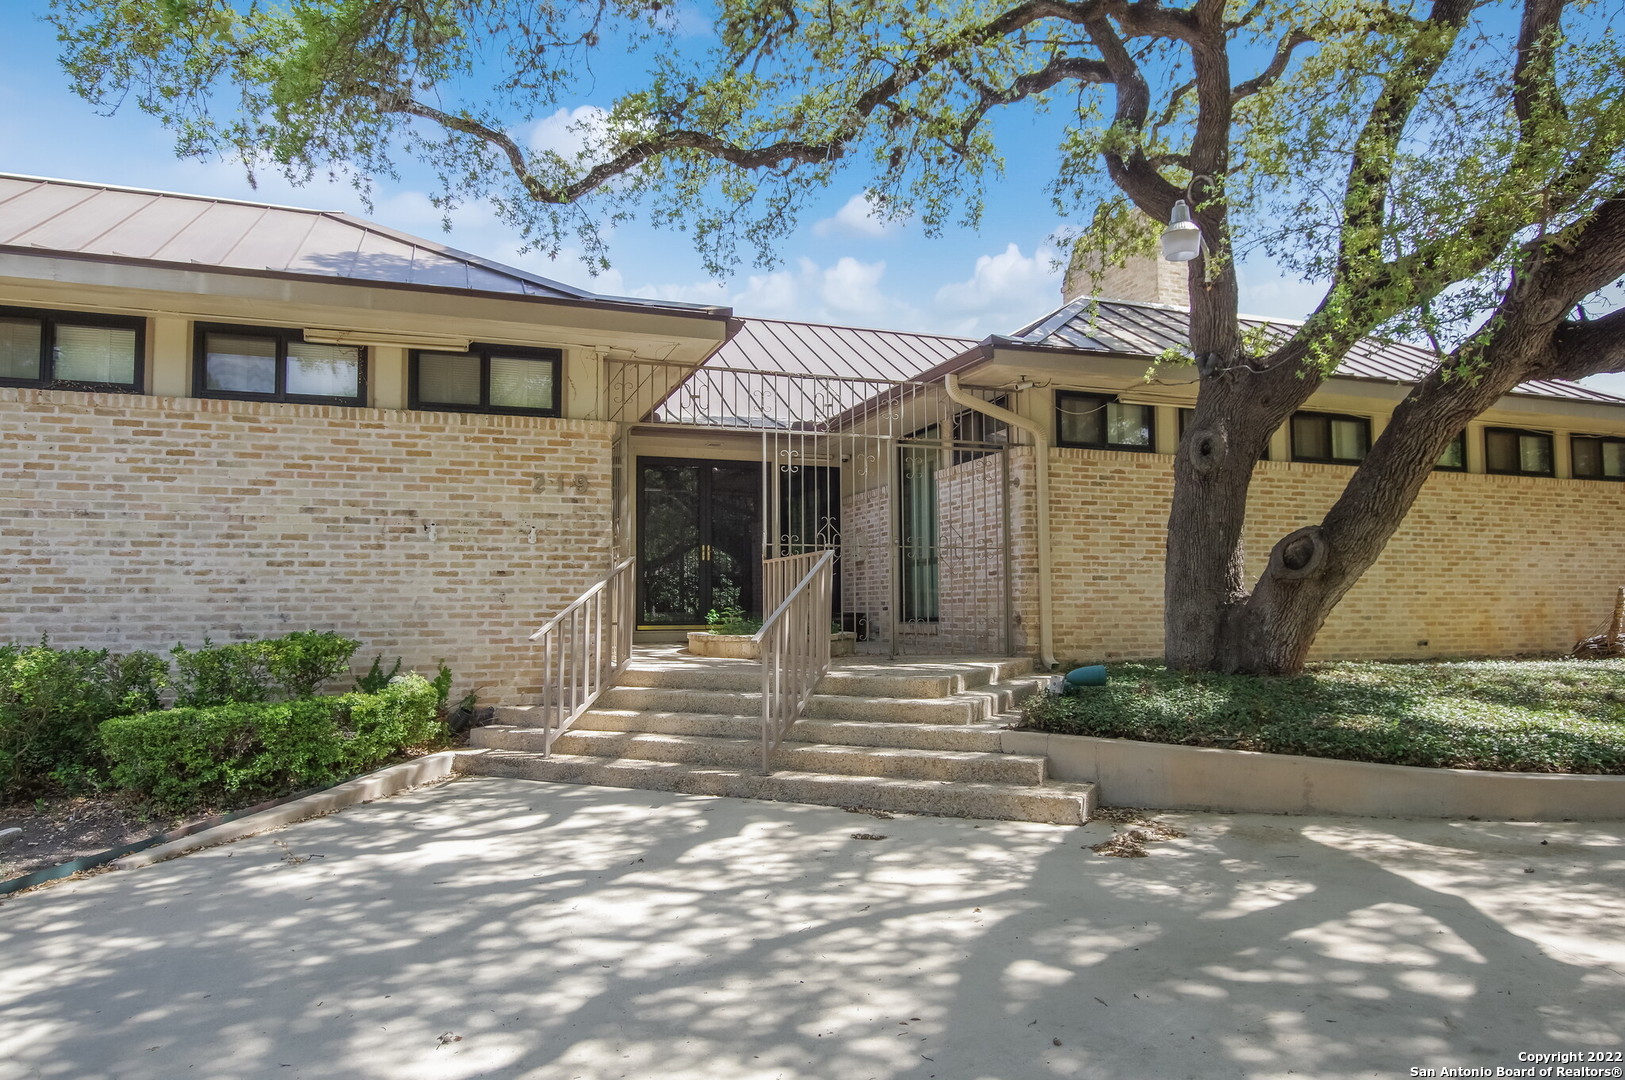 Located on one of the bigger lots on a beautiful tree lined street in Oak Park, this mid century modern 5 bedroom 4 full bath, 1 half bath home offers location and Alamo Heights schools. Natural light is plentiful in the living areas through floor to ceiling windows that overlook the pool area. 2 bedrooms with ensuites are located on lower level with their own entrances to the back yard. A covered porch area around the pool and deck make this home flow well for indoor/outdoor entertaining. Fireplaces are located in the master bedroom, living area and kitchen. 3 car rear entry garage.